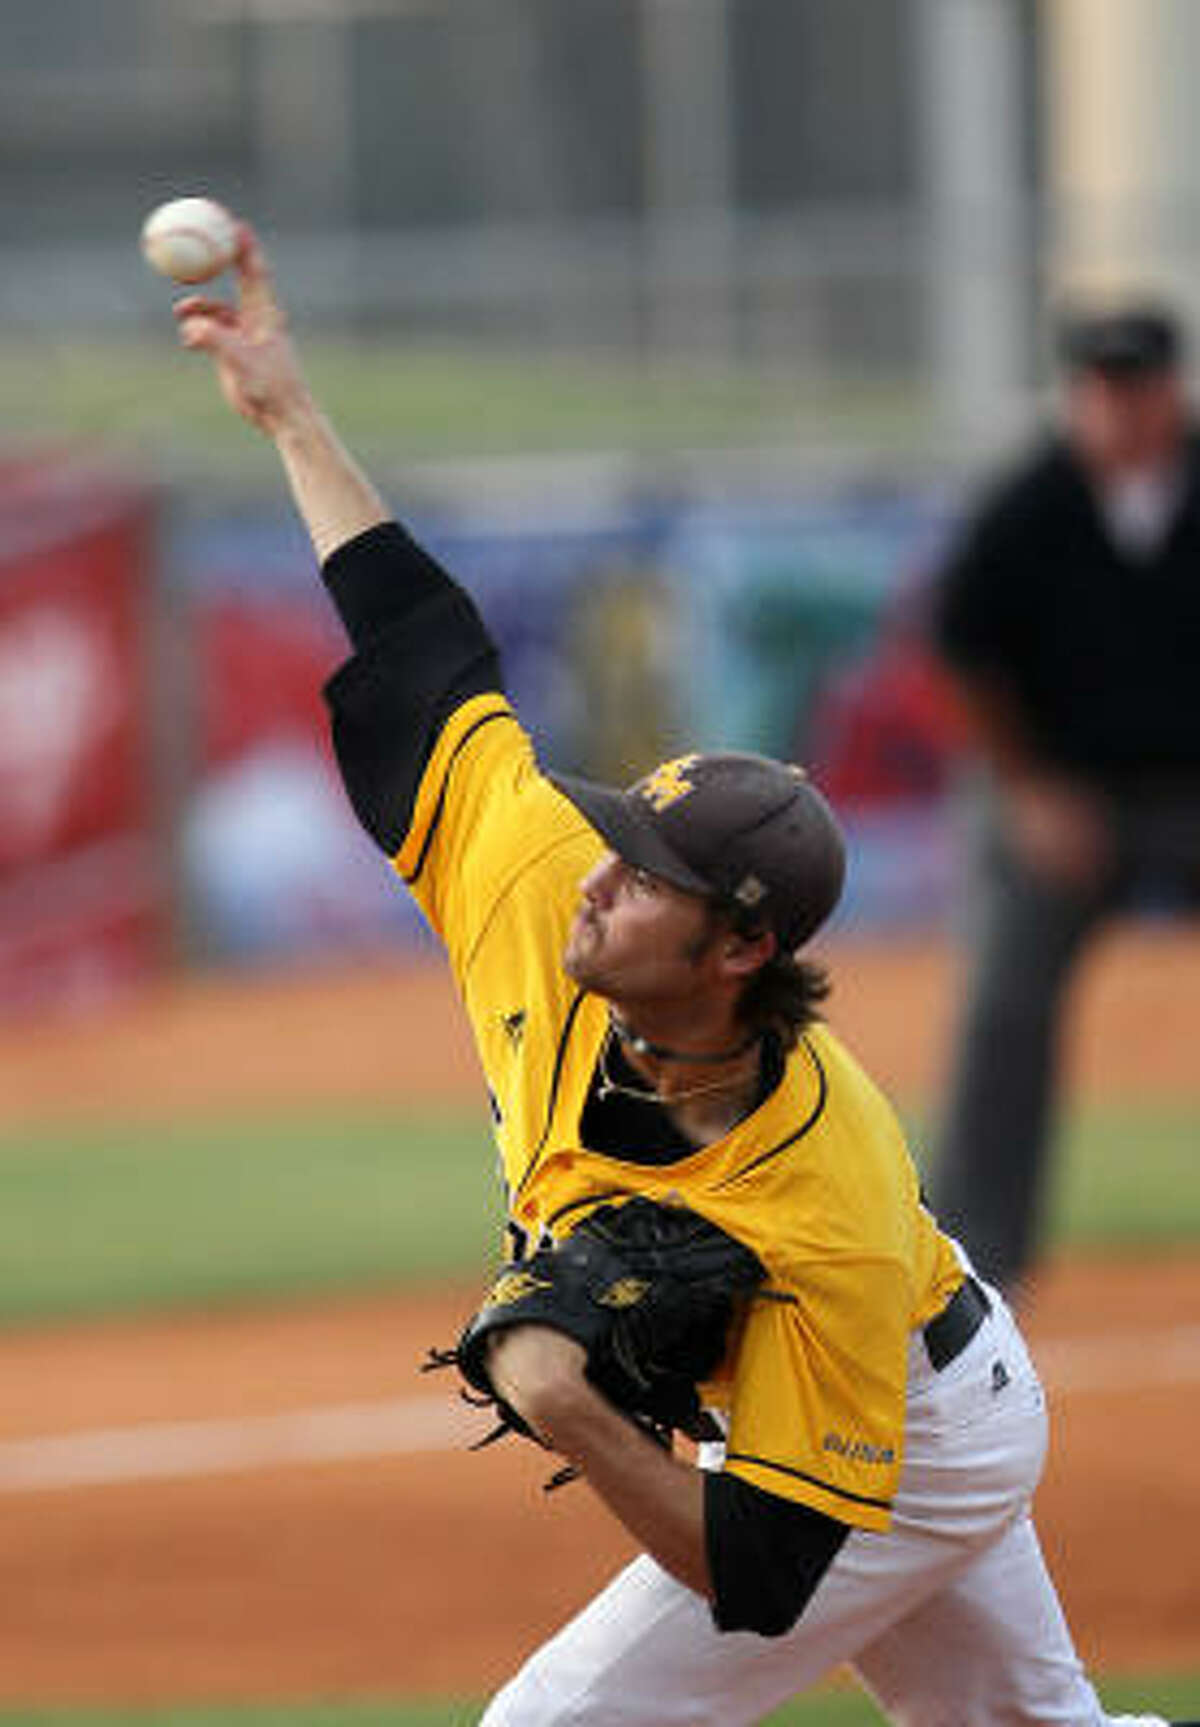 Southern Miss pitcher Todd McInnis allowed four runs to a Rice offense that scored 53 runs in the first three games of the tournament.